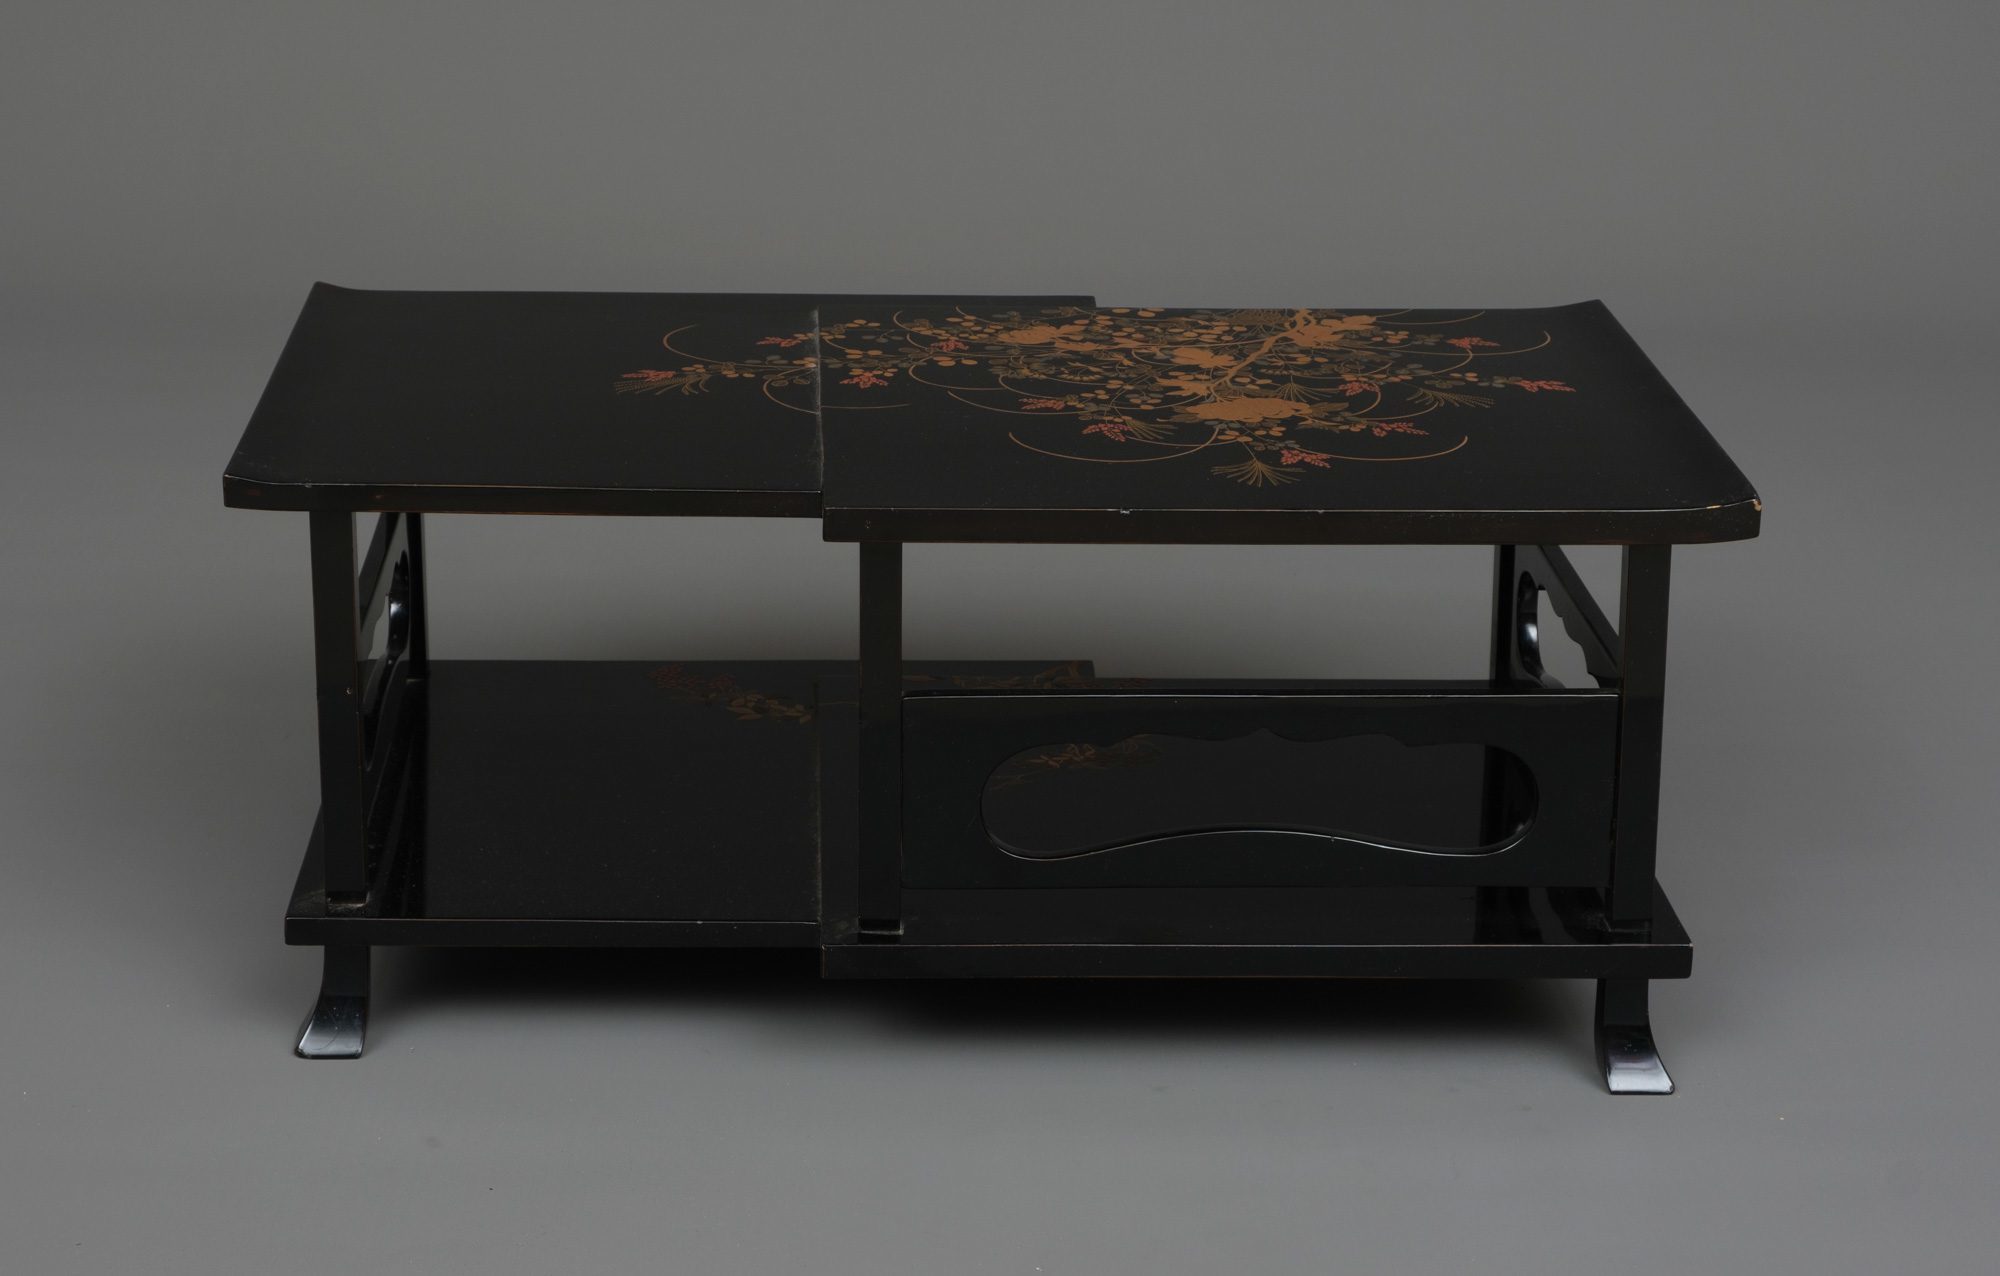 A JAPANESE LACQUER LOW TWO-TIERED DISPLAY TABLE, 1912-1926 (TAISHO PERIOD) - Image 4 of 15